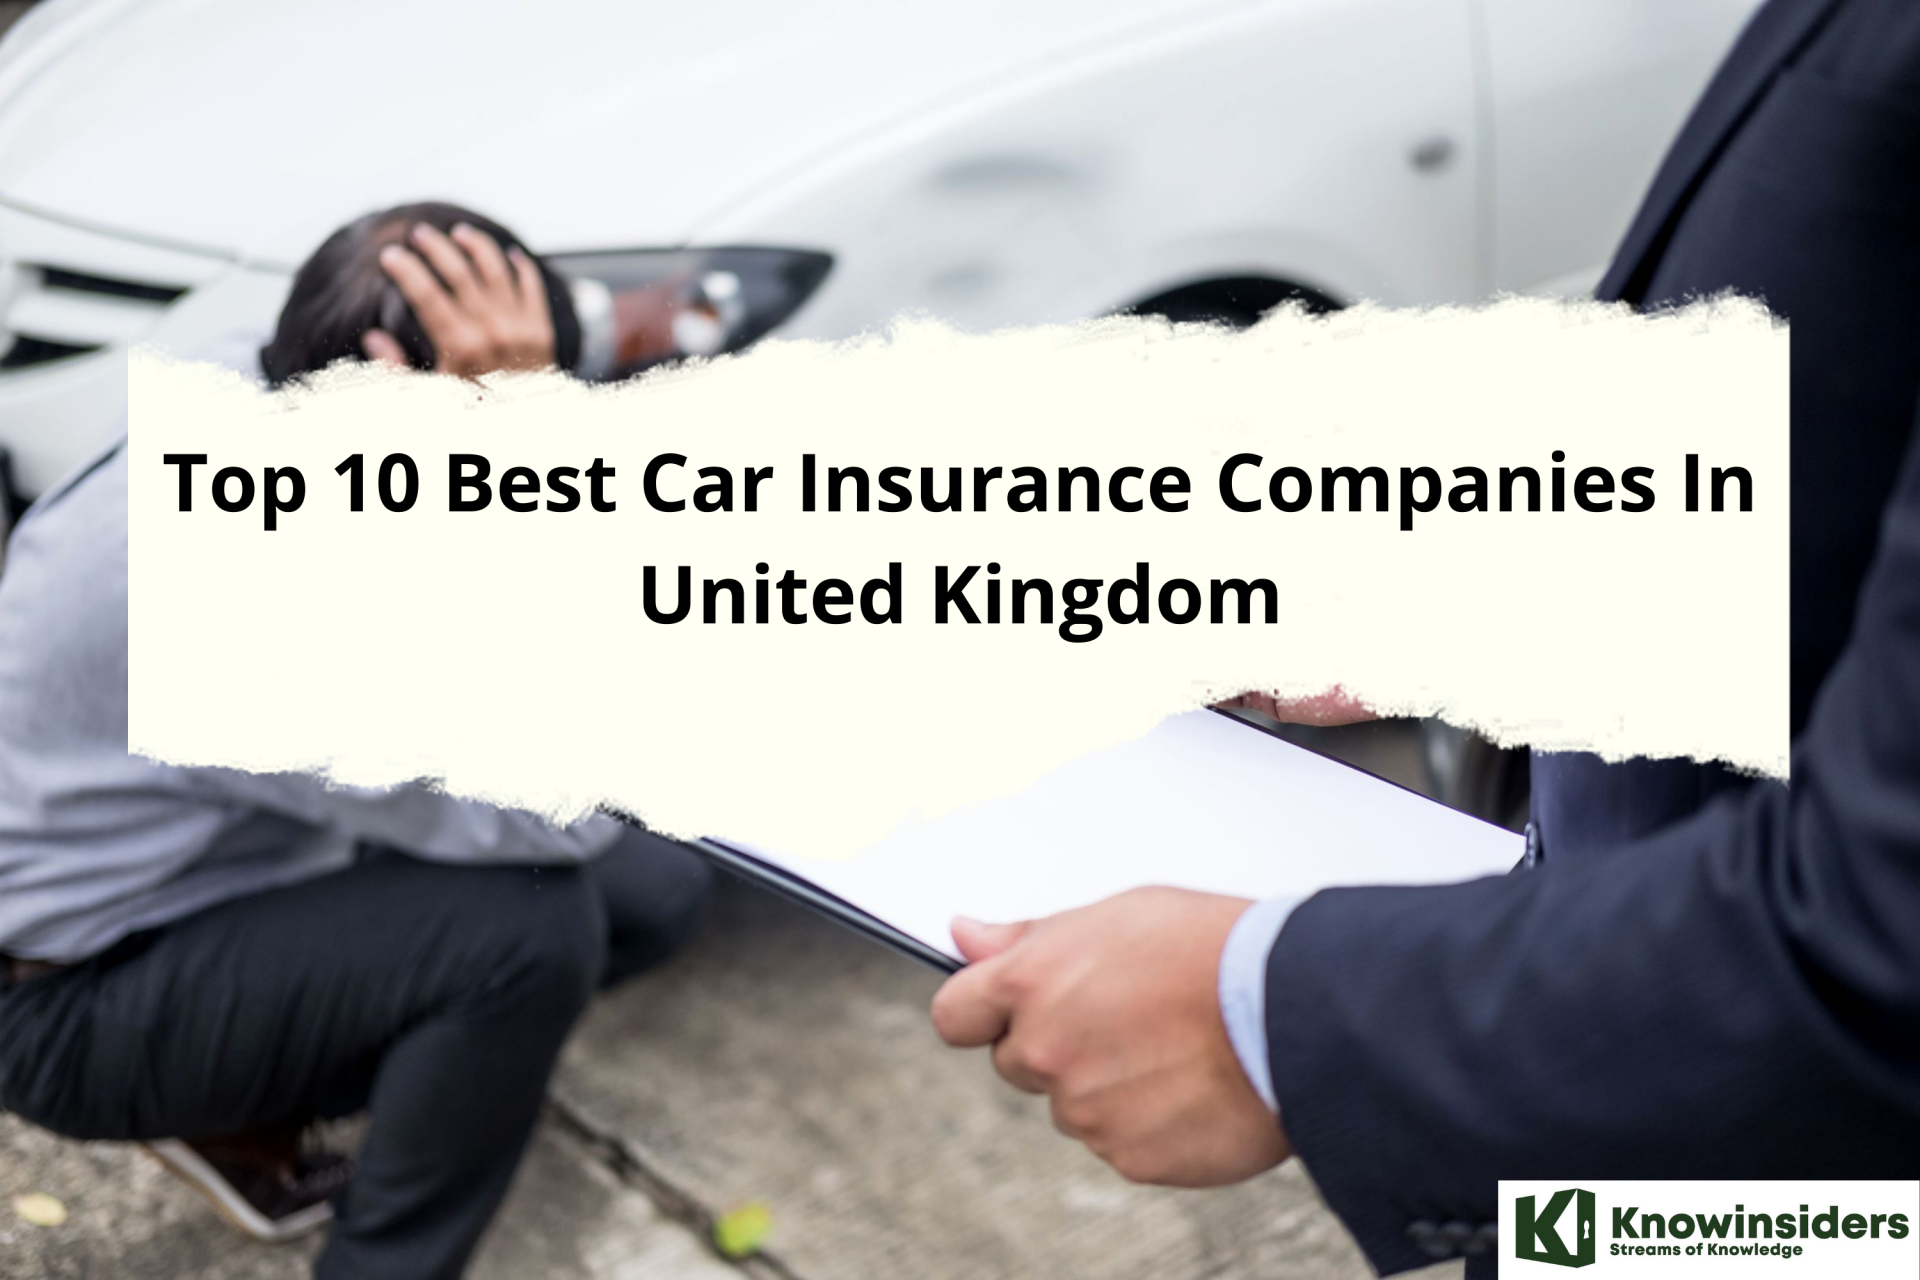 10 Best Car Insurance Companies in UK - Cheapest Quotes and Good Services